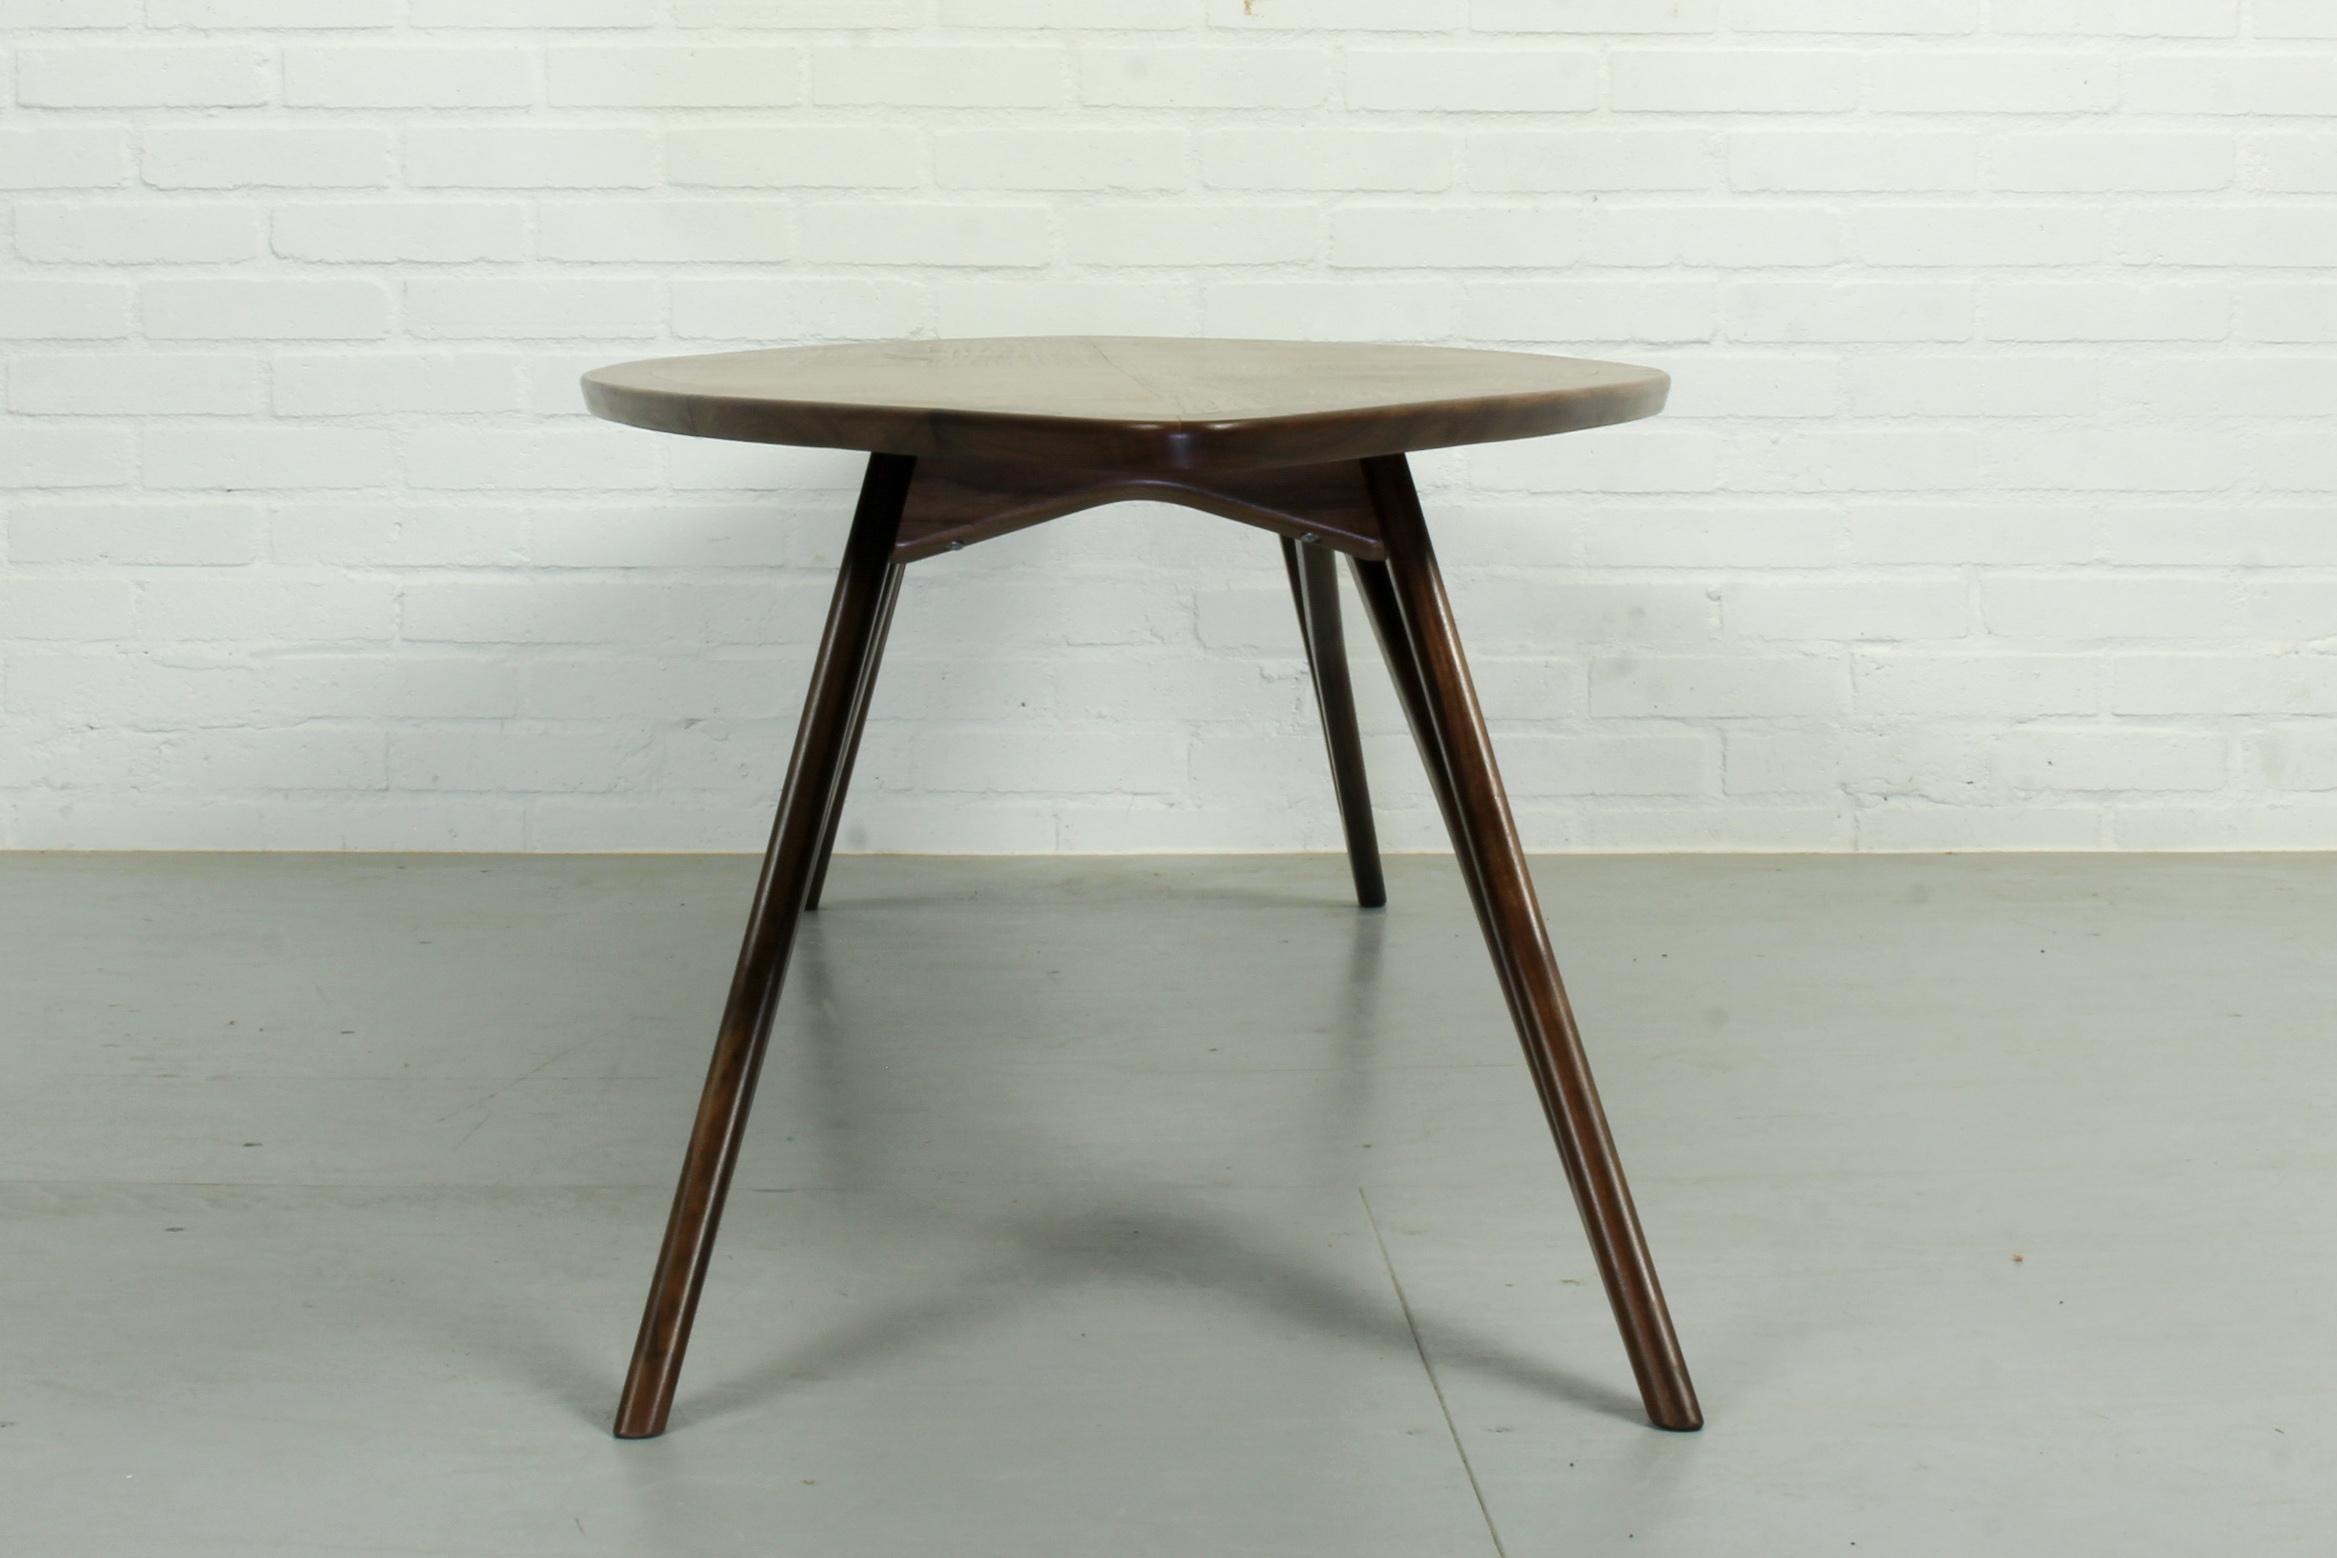 20th Century Midcentury Style Curved American Nut Coffee Table For Sale